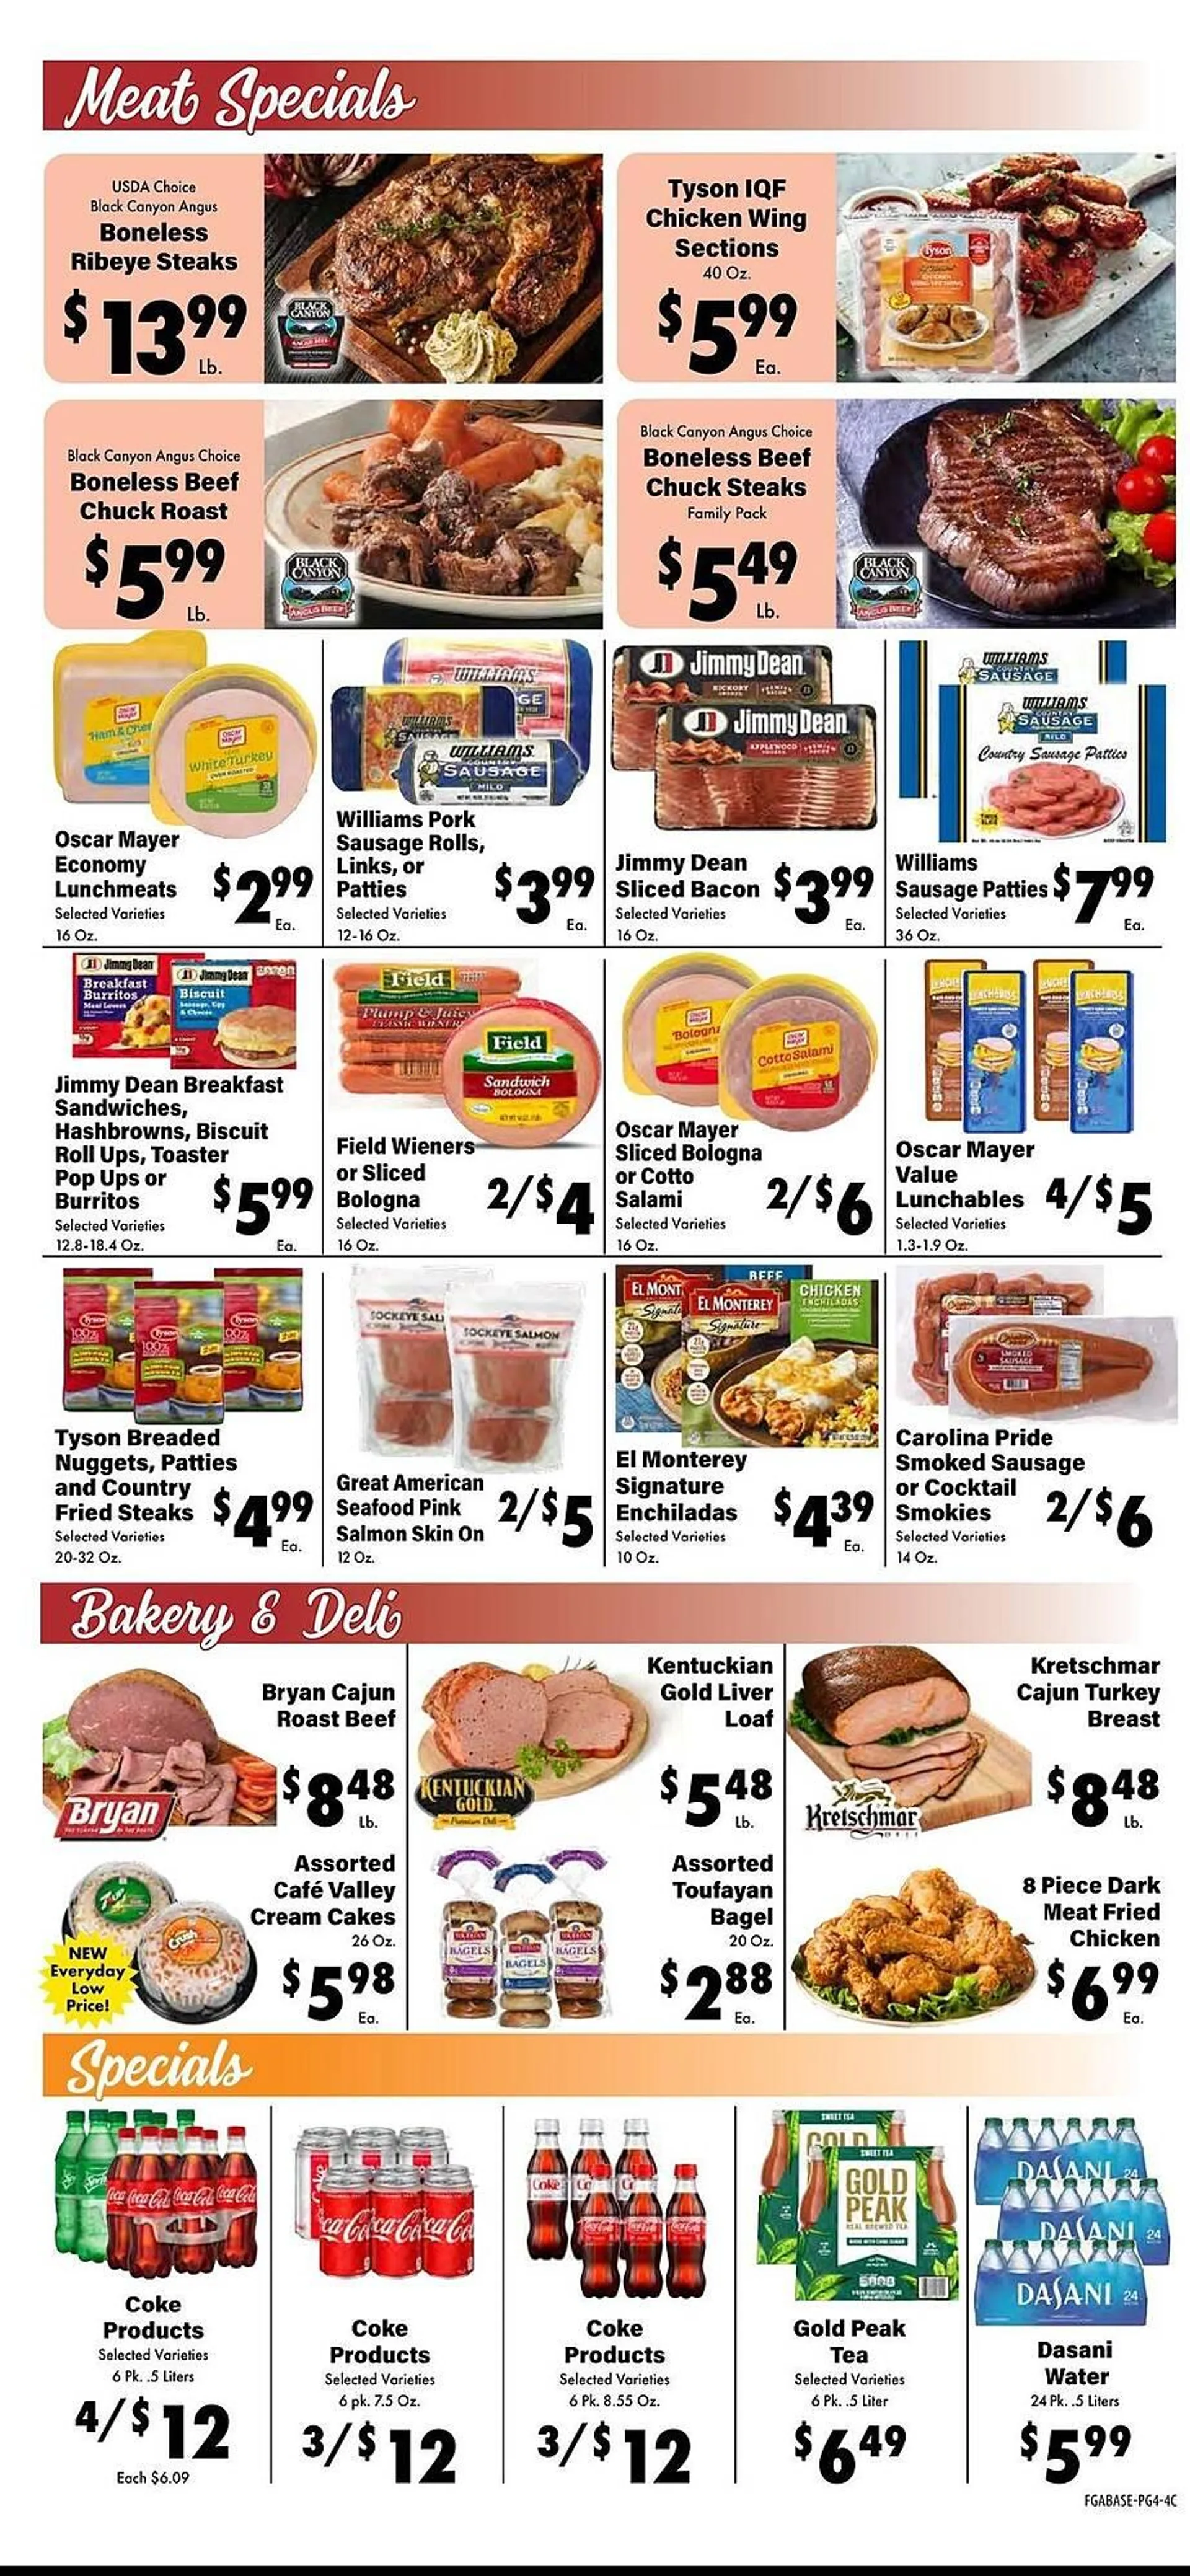 Piggly Wiggly Weekly Ad - 4